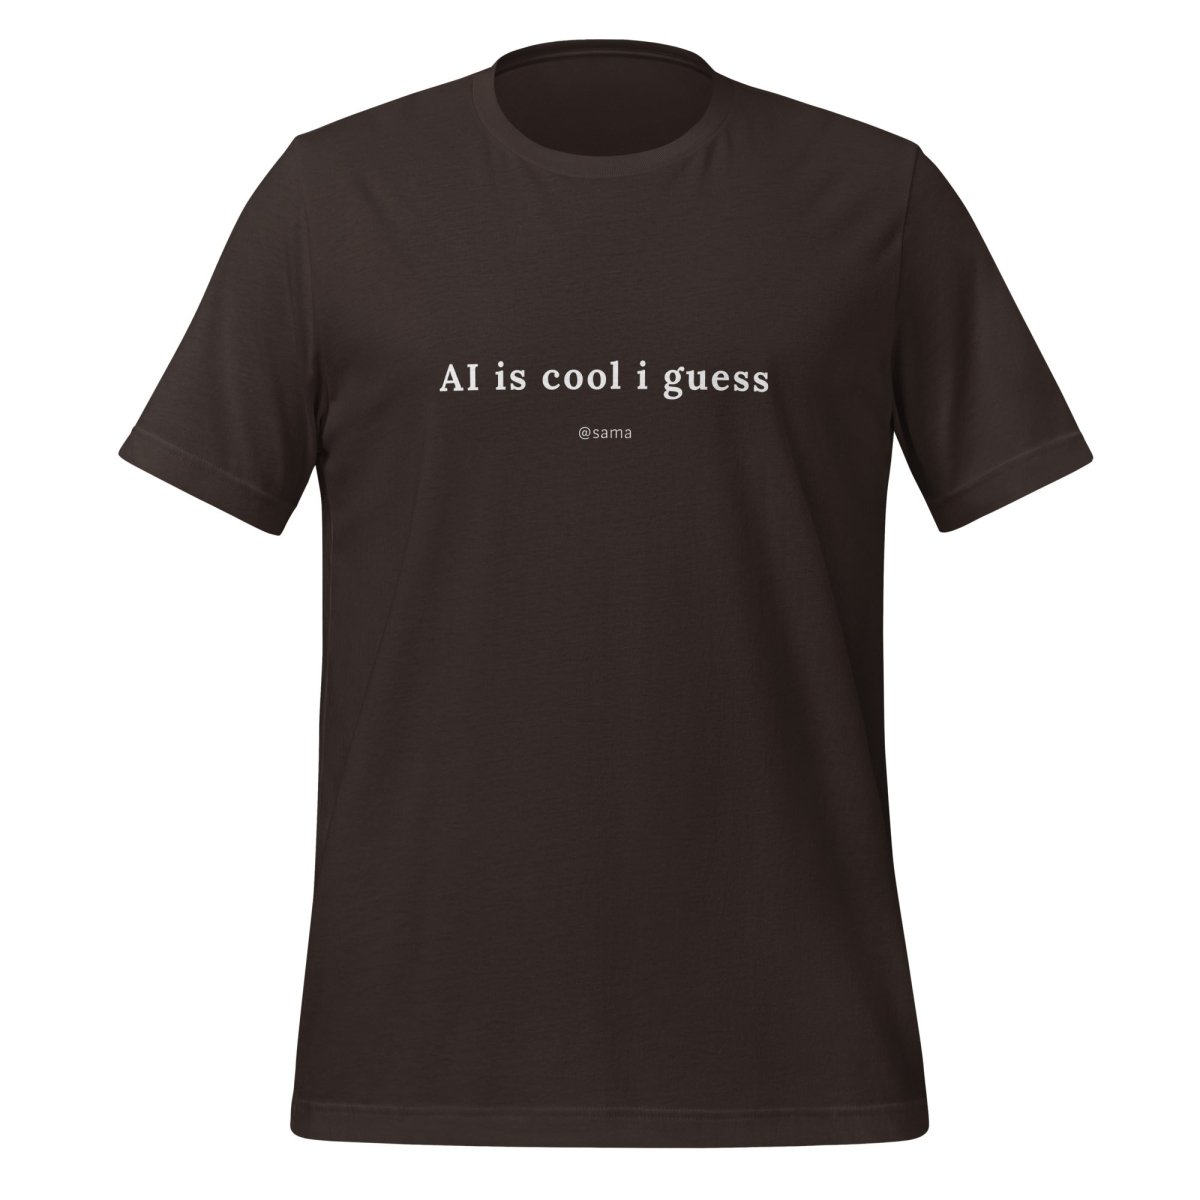 AI is cool i guess [@sama] T - Shirt (unisex) - Brown - AI Store